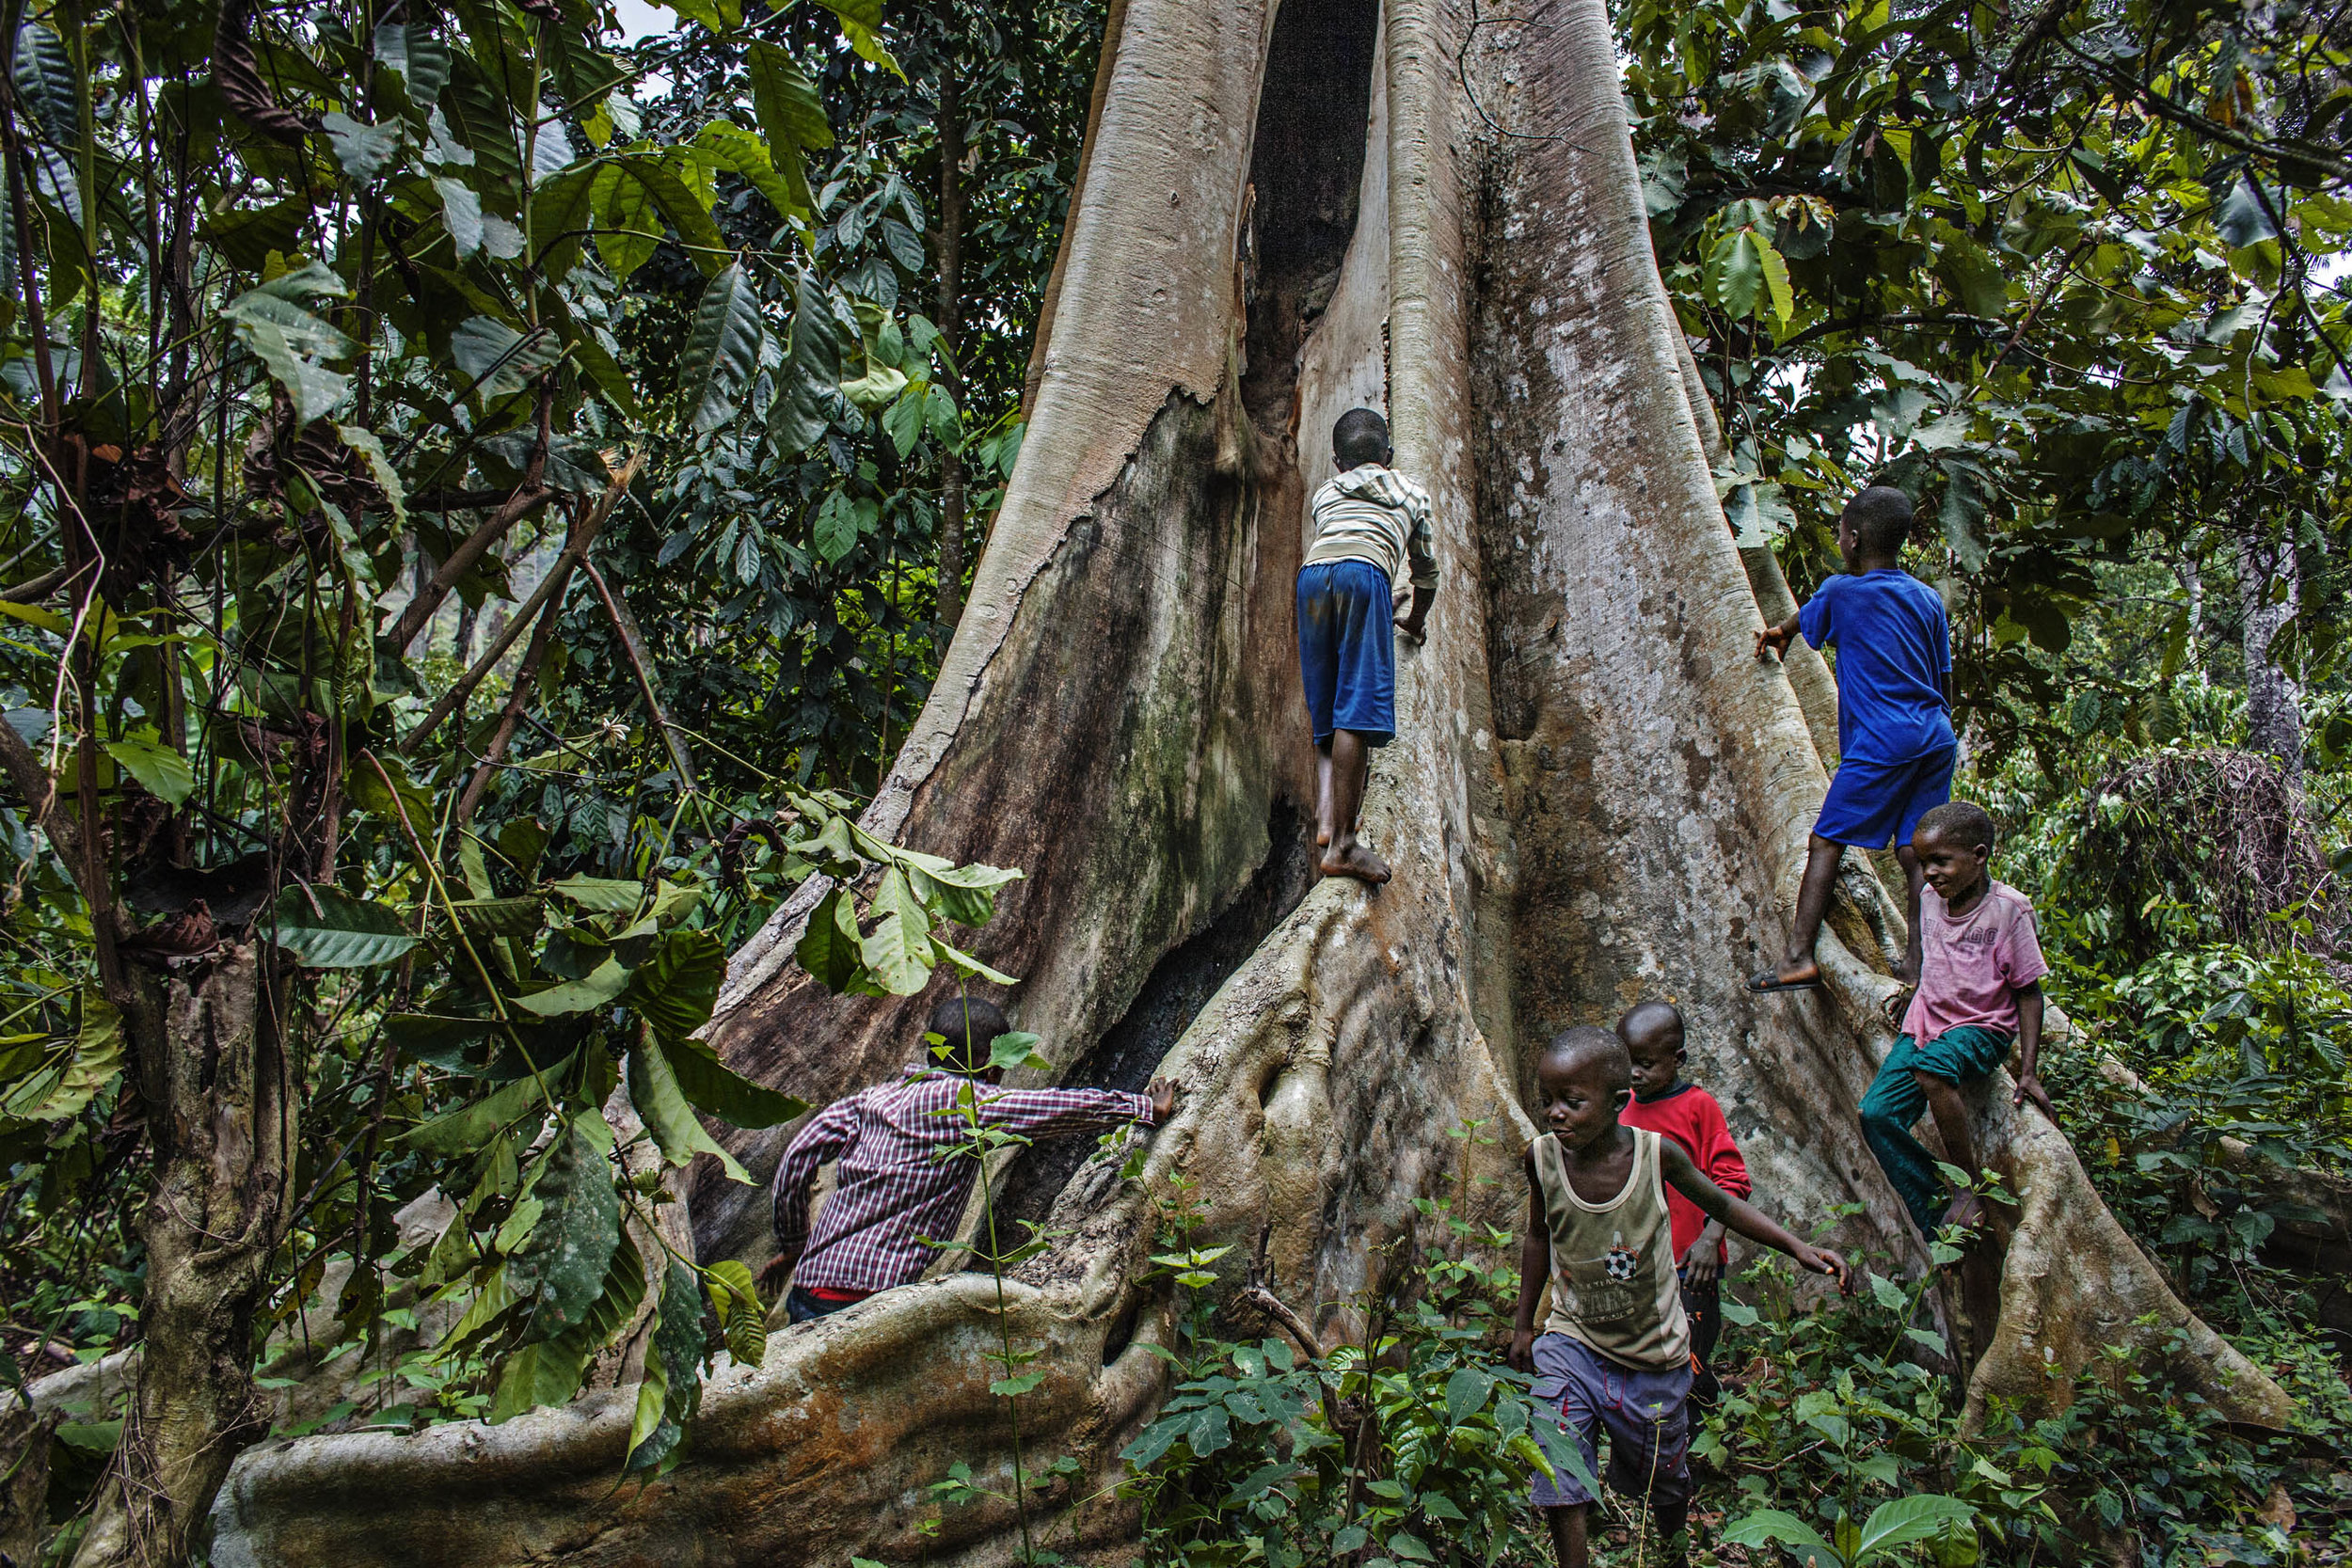  Young boys play around the tree that used to house a large colony of insect bats. Dr. Fabian Leendertz suspects that these bats may have bee the reservoir host for the Ebola virus that broke out in Meliandou in December 2013.  (Pete Muller/Prime for